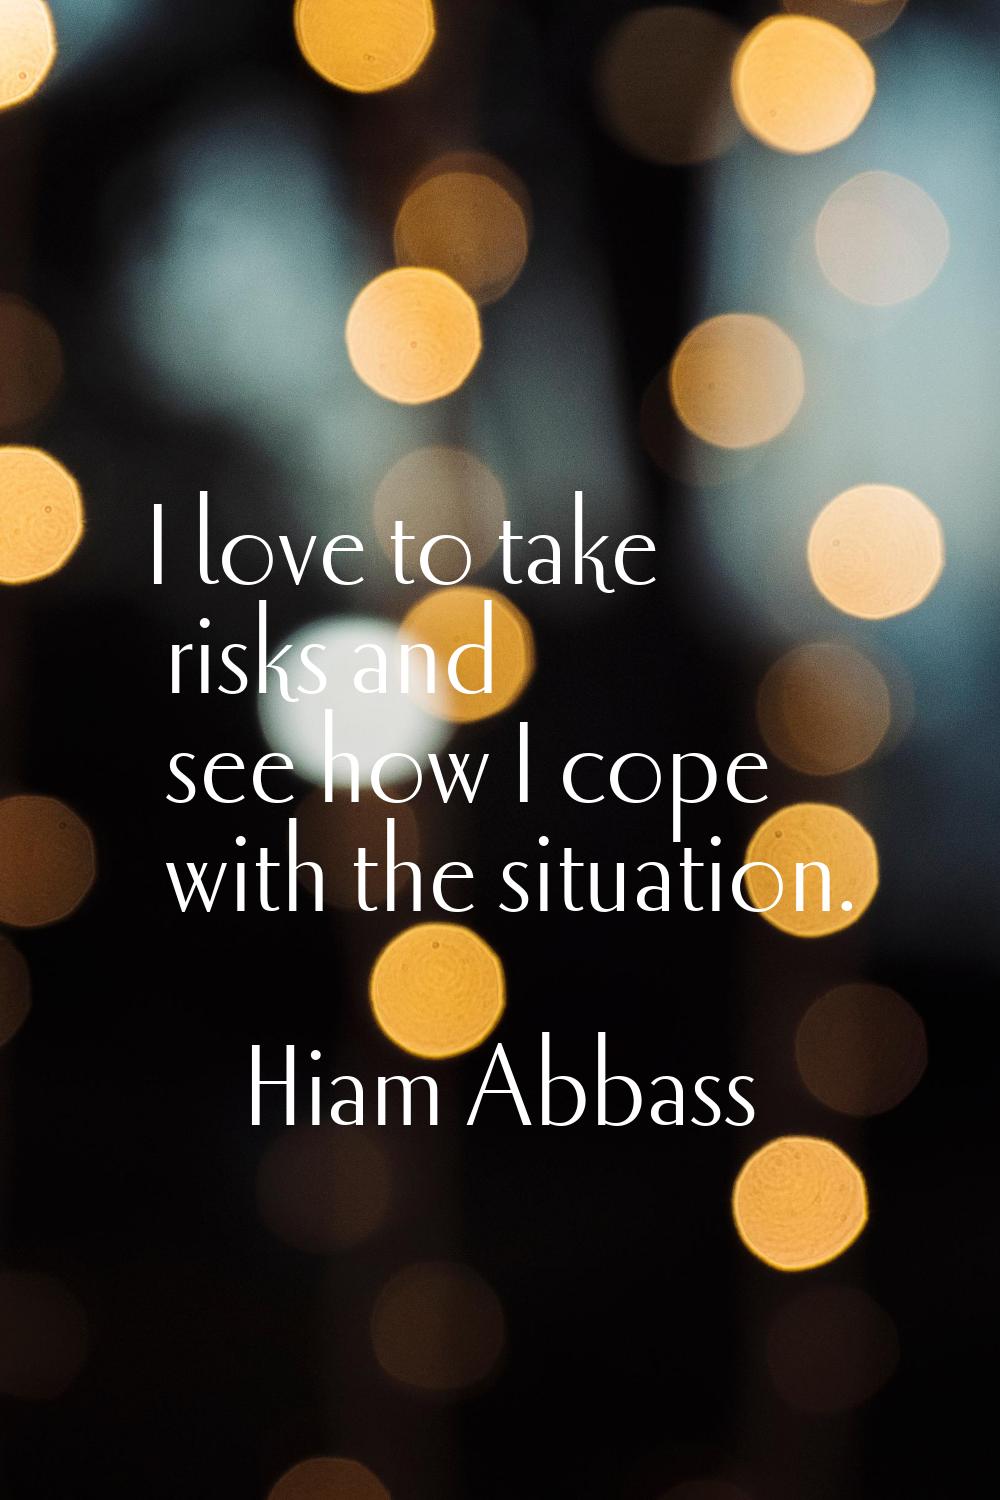 I love to take risks and see how I cope with the situation.